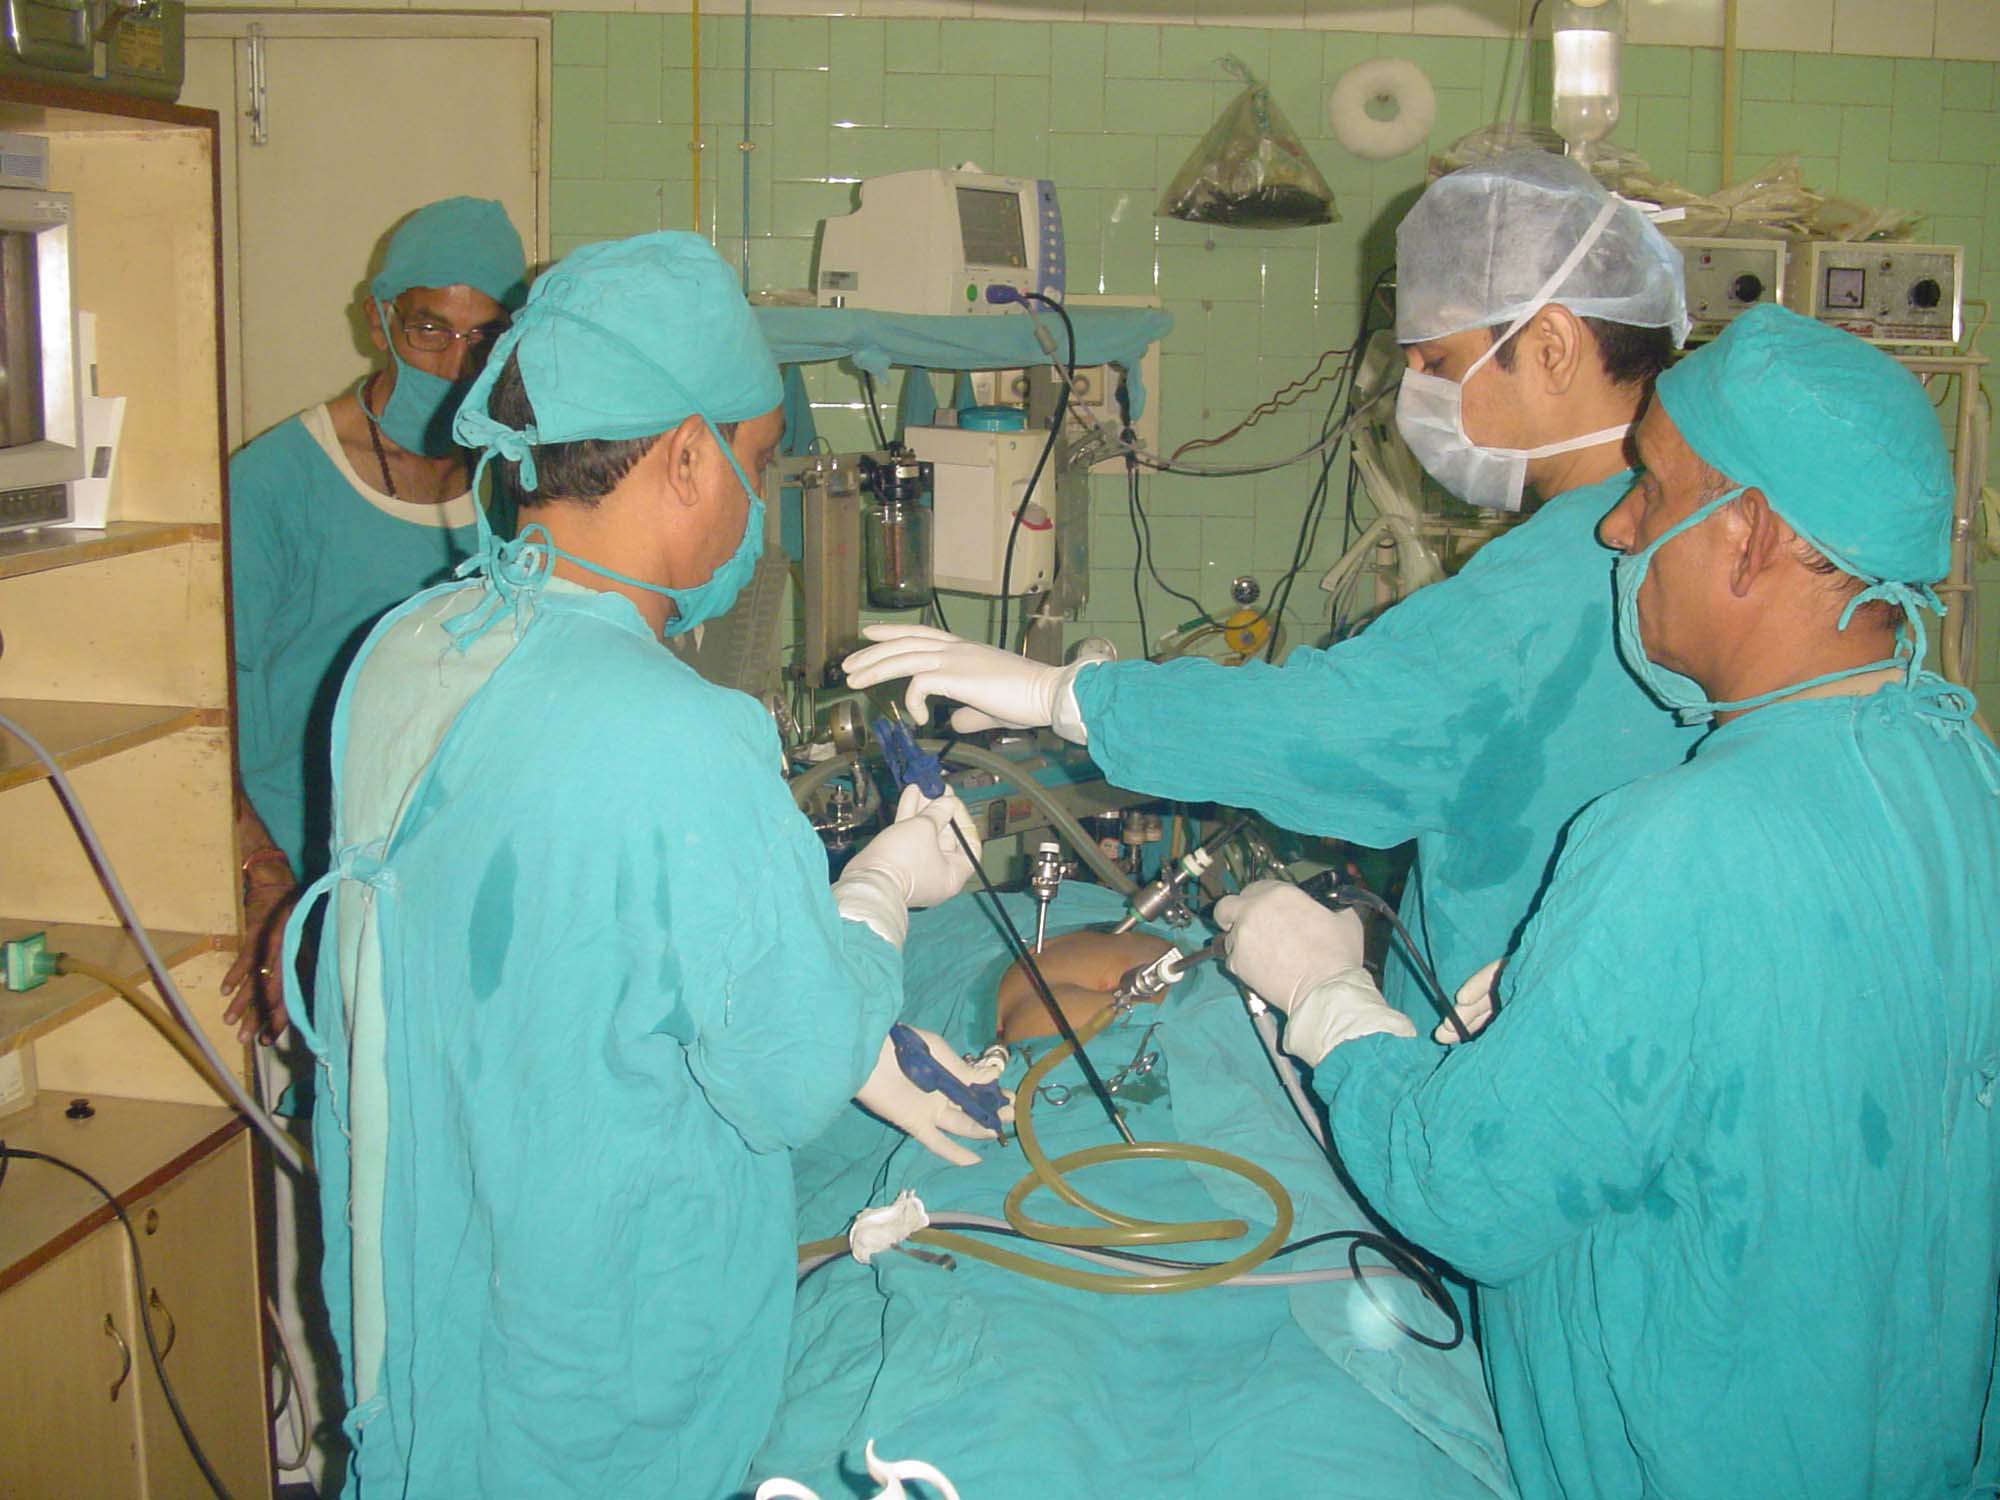 Surgeons in OR